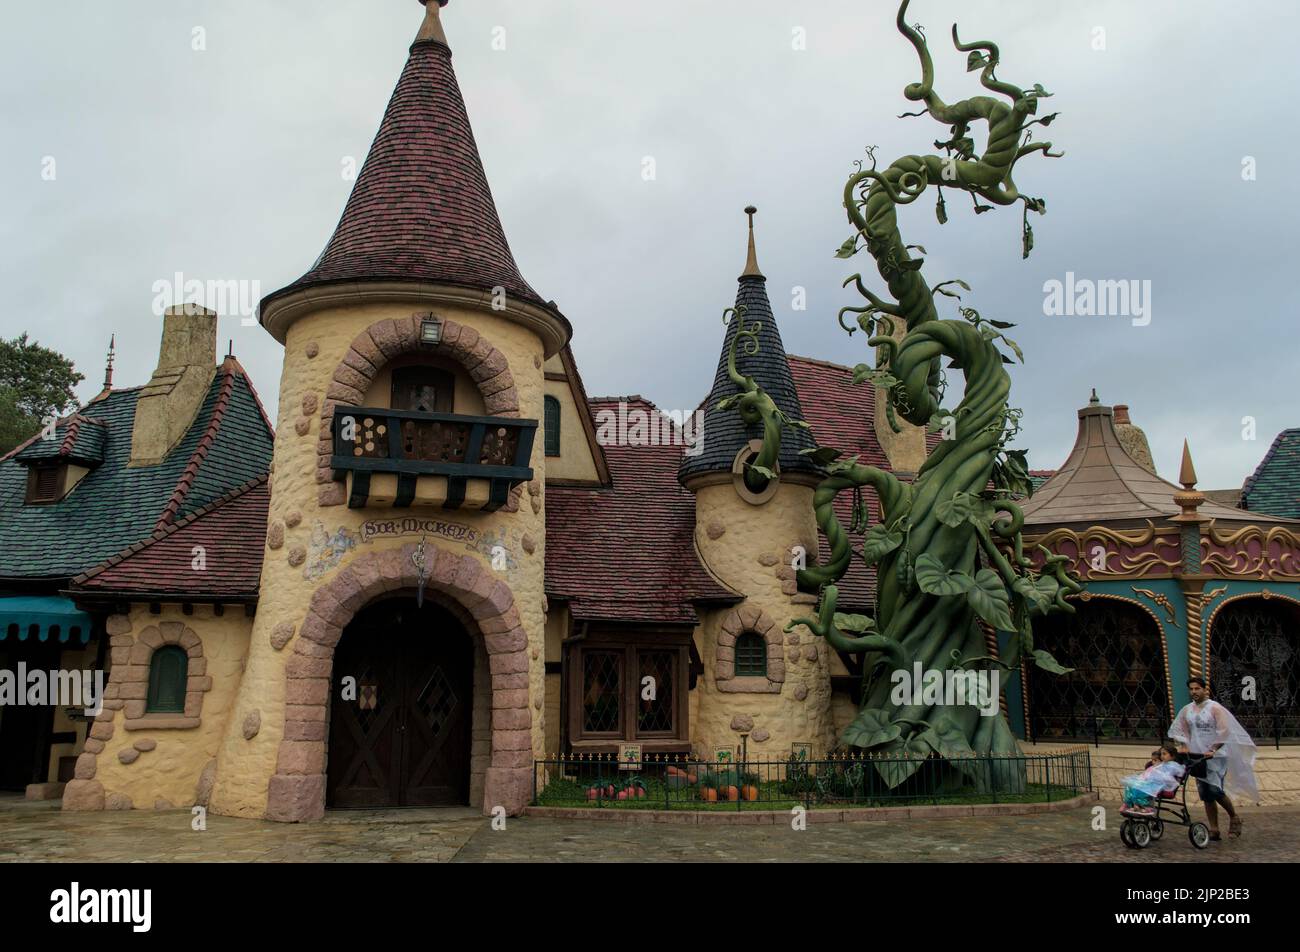 The castle of Sir Mickey's turret in fantasyland Disneyland in Paris, France Stock Photo